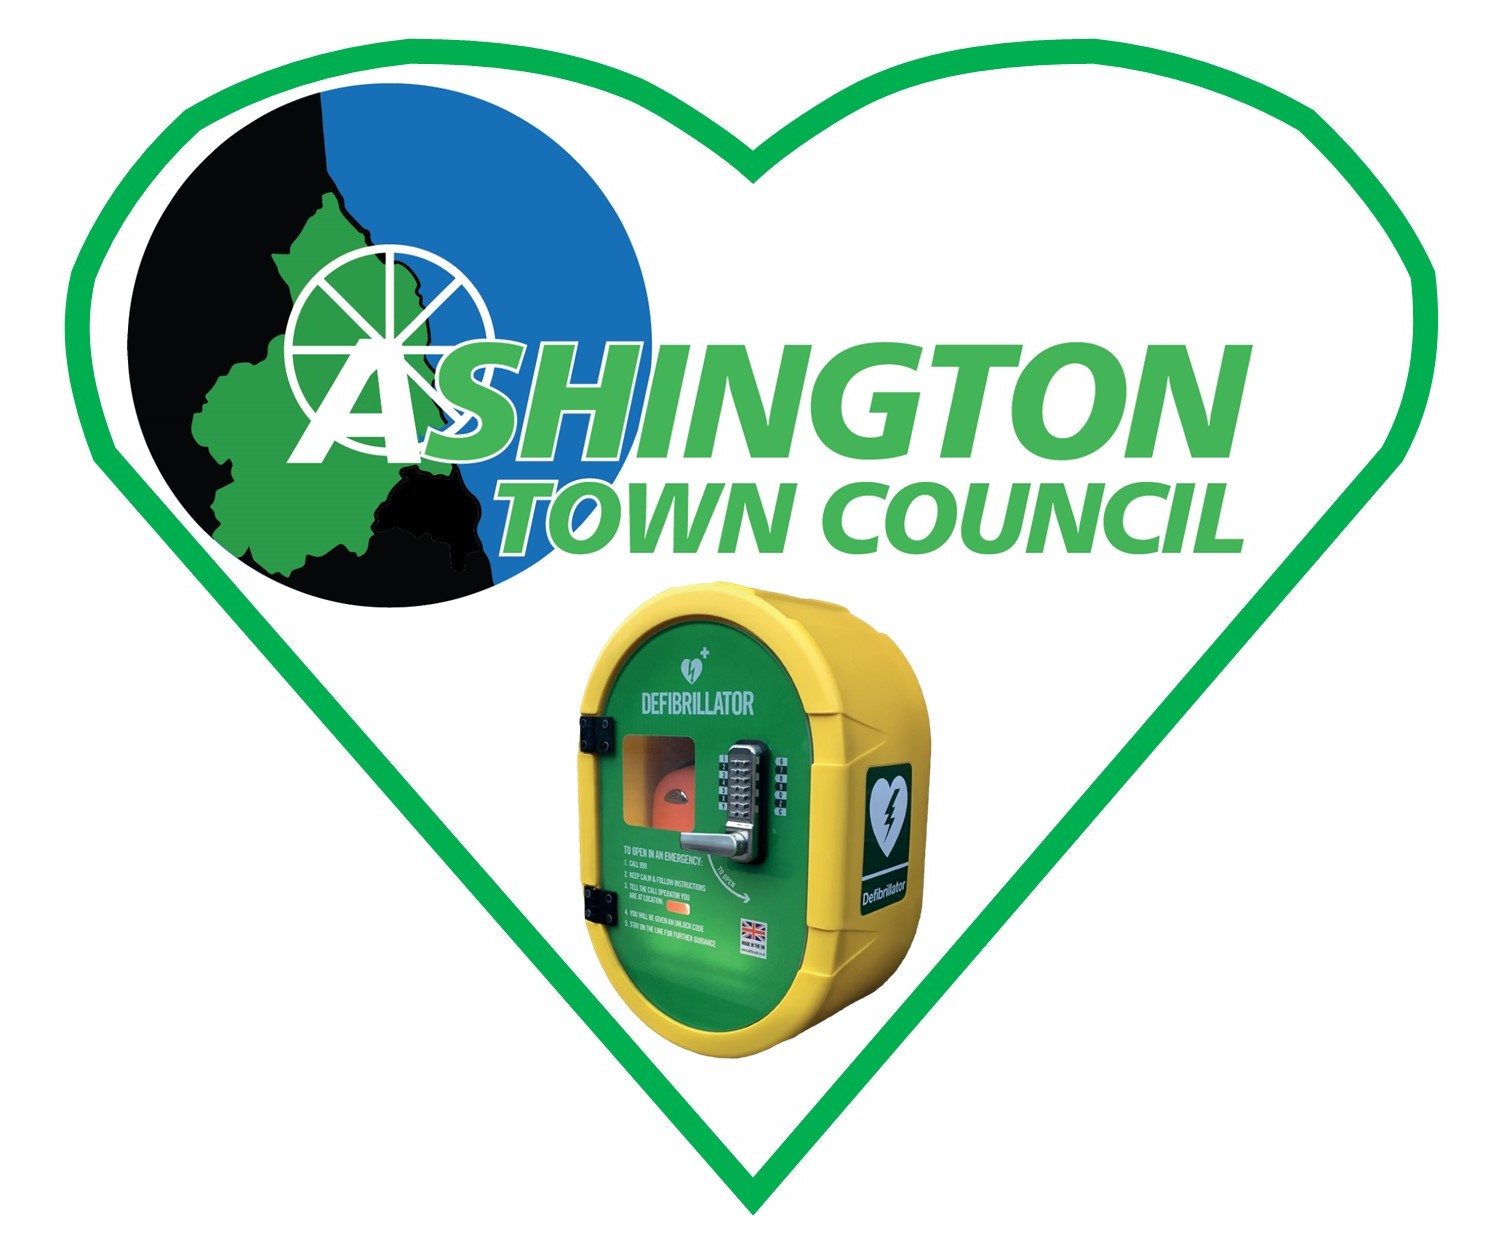 Twelve additional defibrillators for the town, and a Council bursting with pride that the project is complete